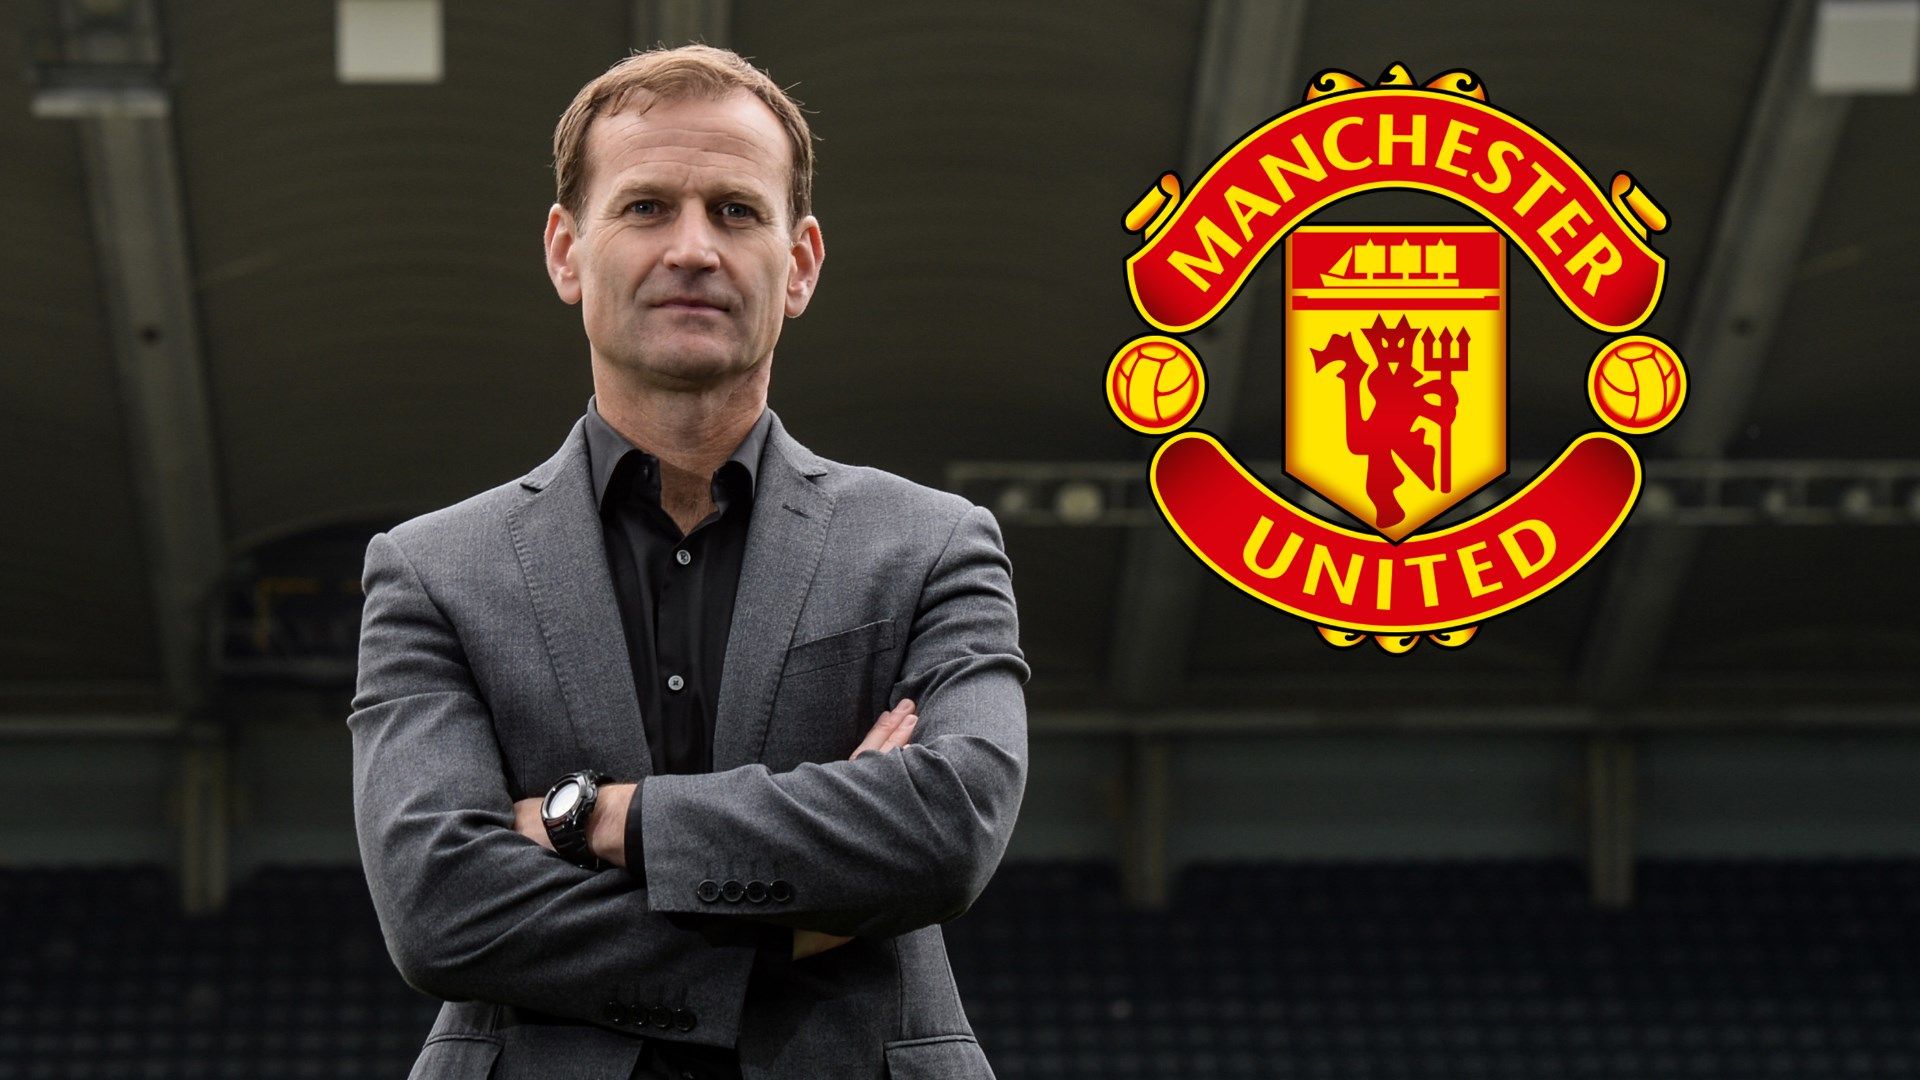 Man Utd Poised to Announce Ashworth as Sporting Director